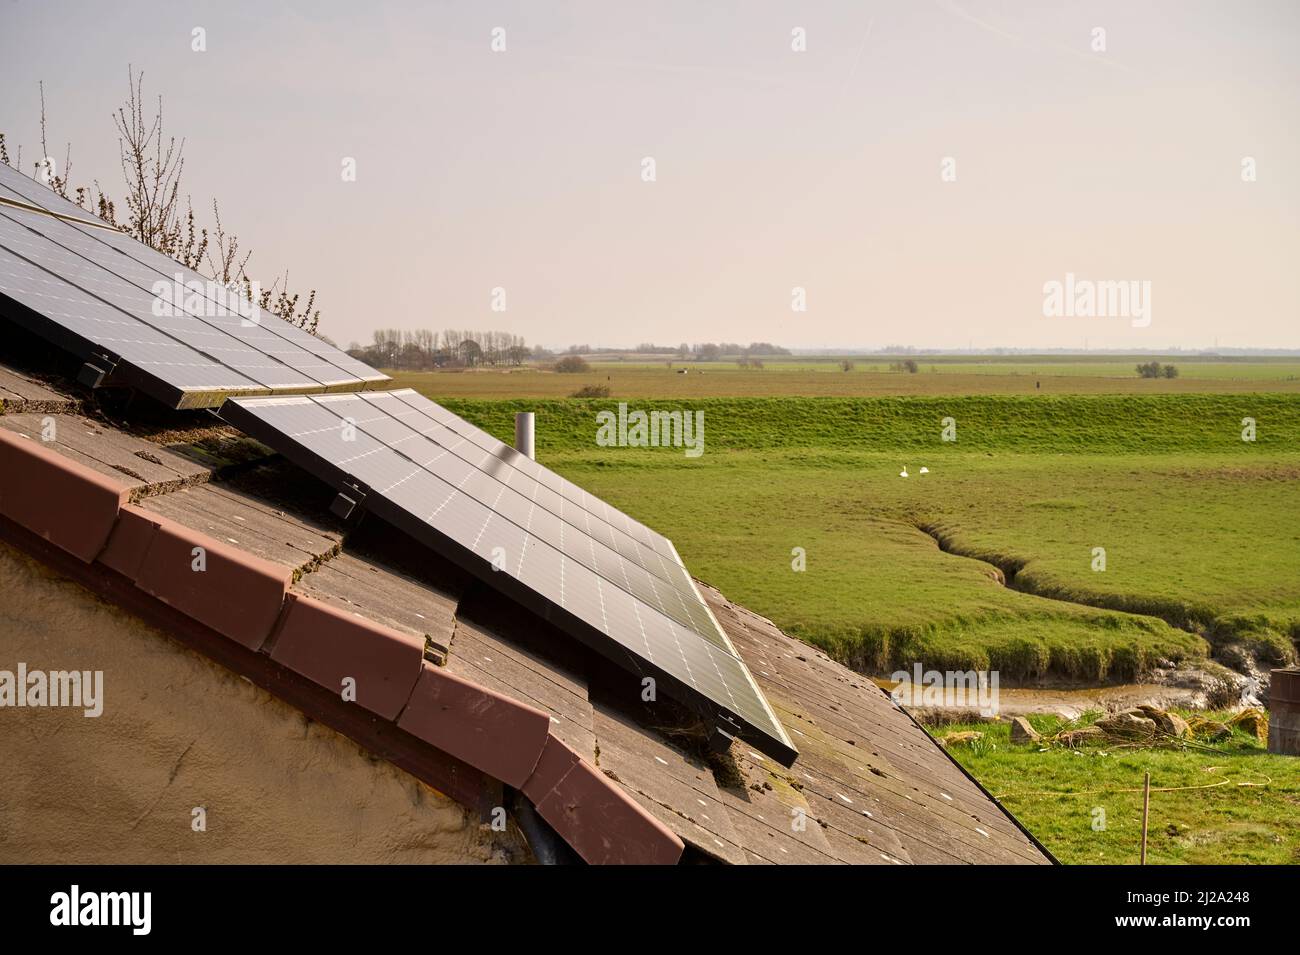 Solar panels on roof of house overlooking river flood plain Stock Photo